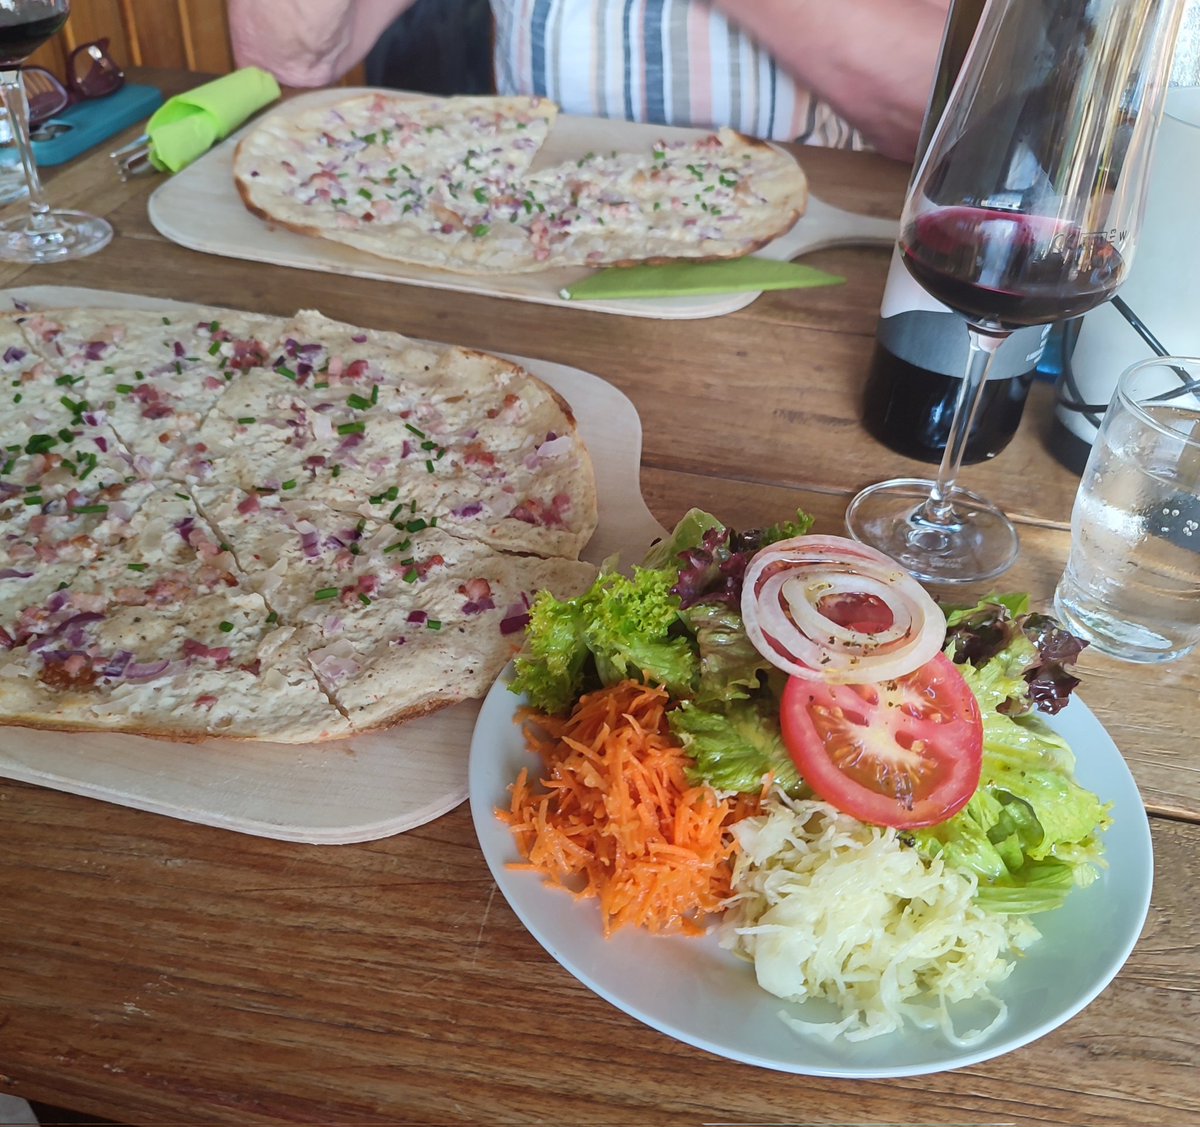 Some folk can be sniffy about Dornfelder but when you find a little family winery by the Mosel which takes pride in its work then it can be a lovely summer evening wine to go with flammkuchen and salad